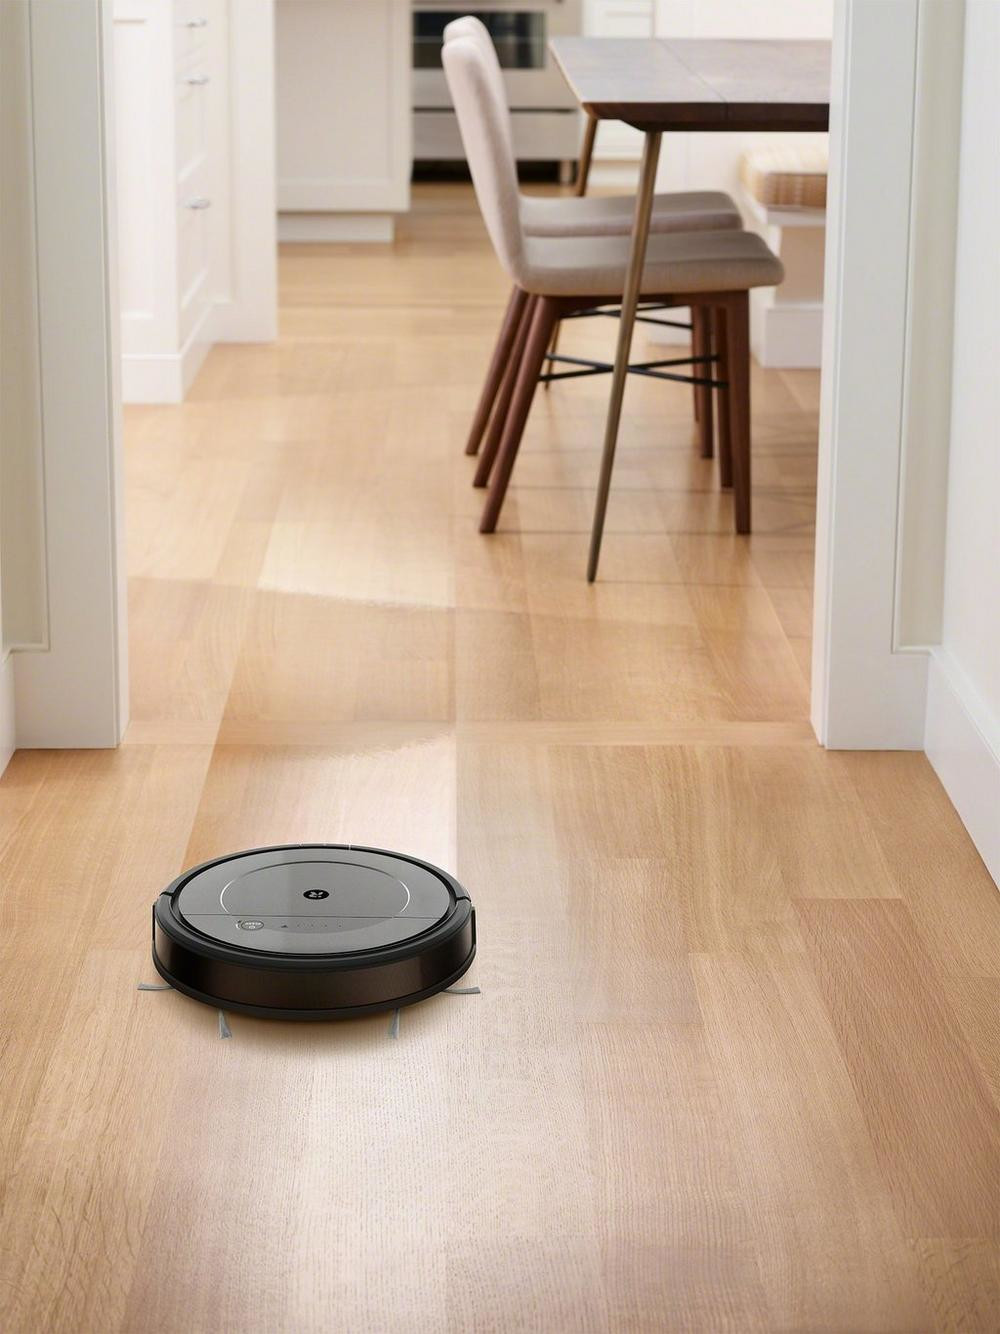 Irobot Roomba Combo Vacuum Cleaner And, Do Roombas Work On Tile Floors